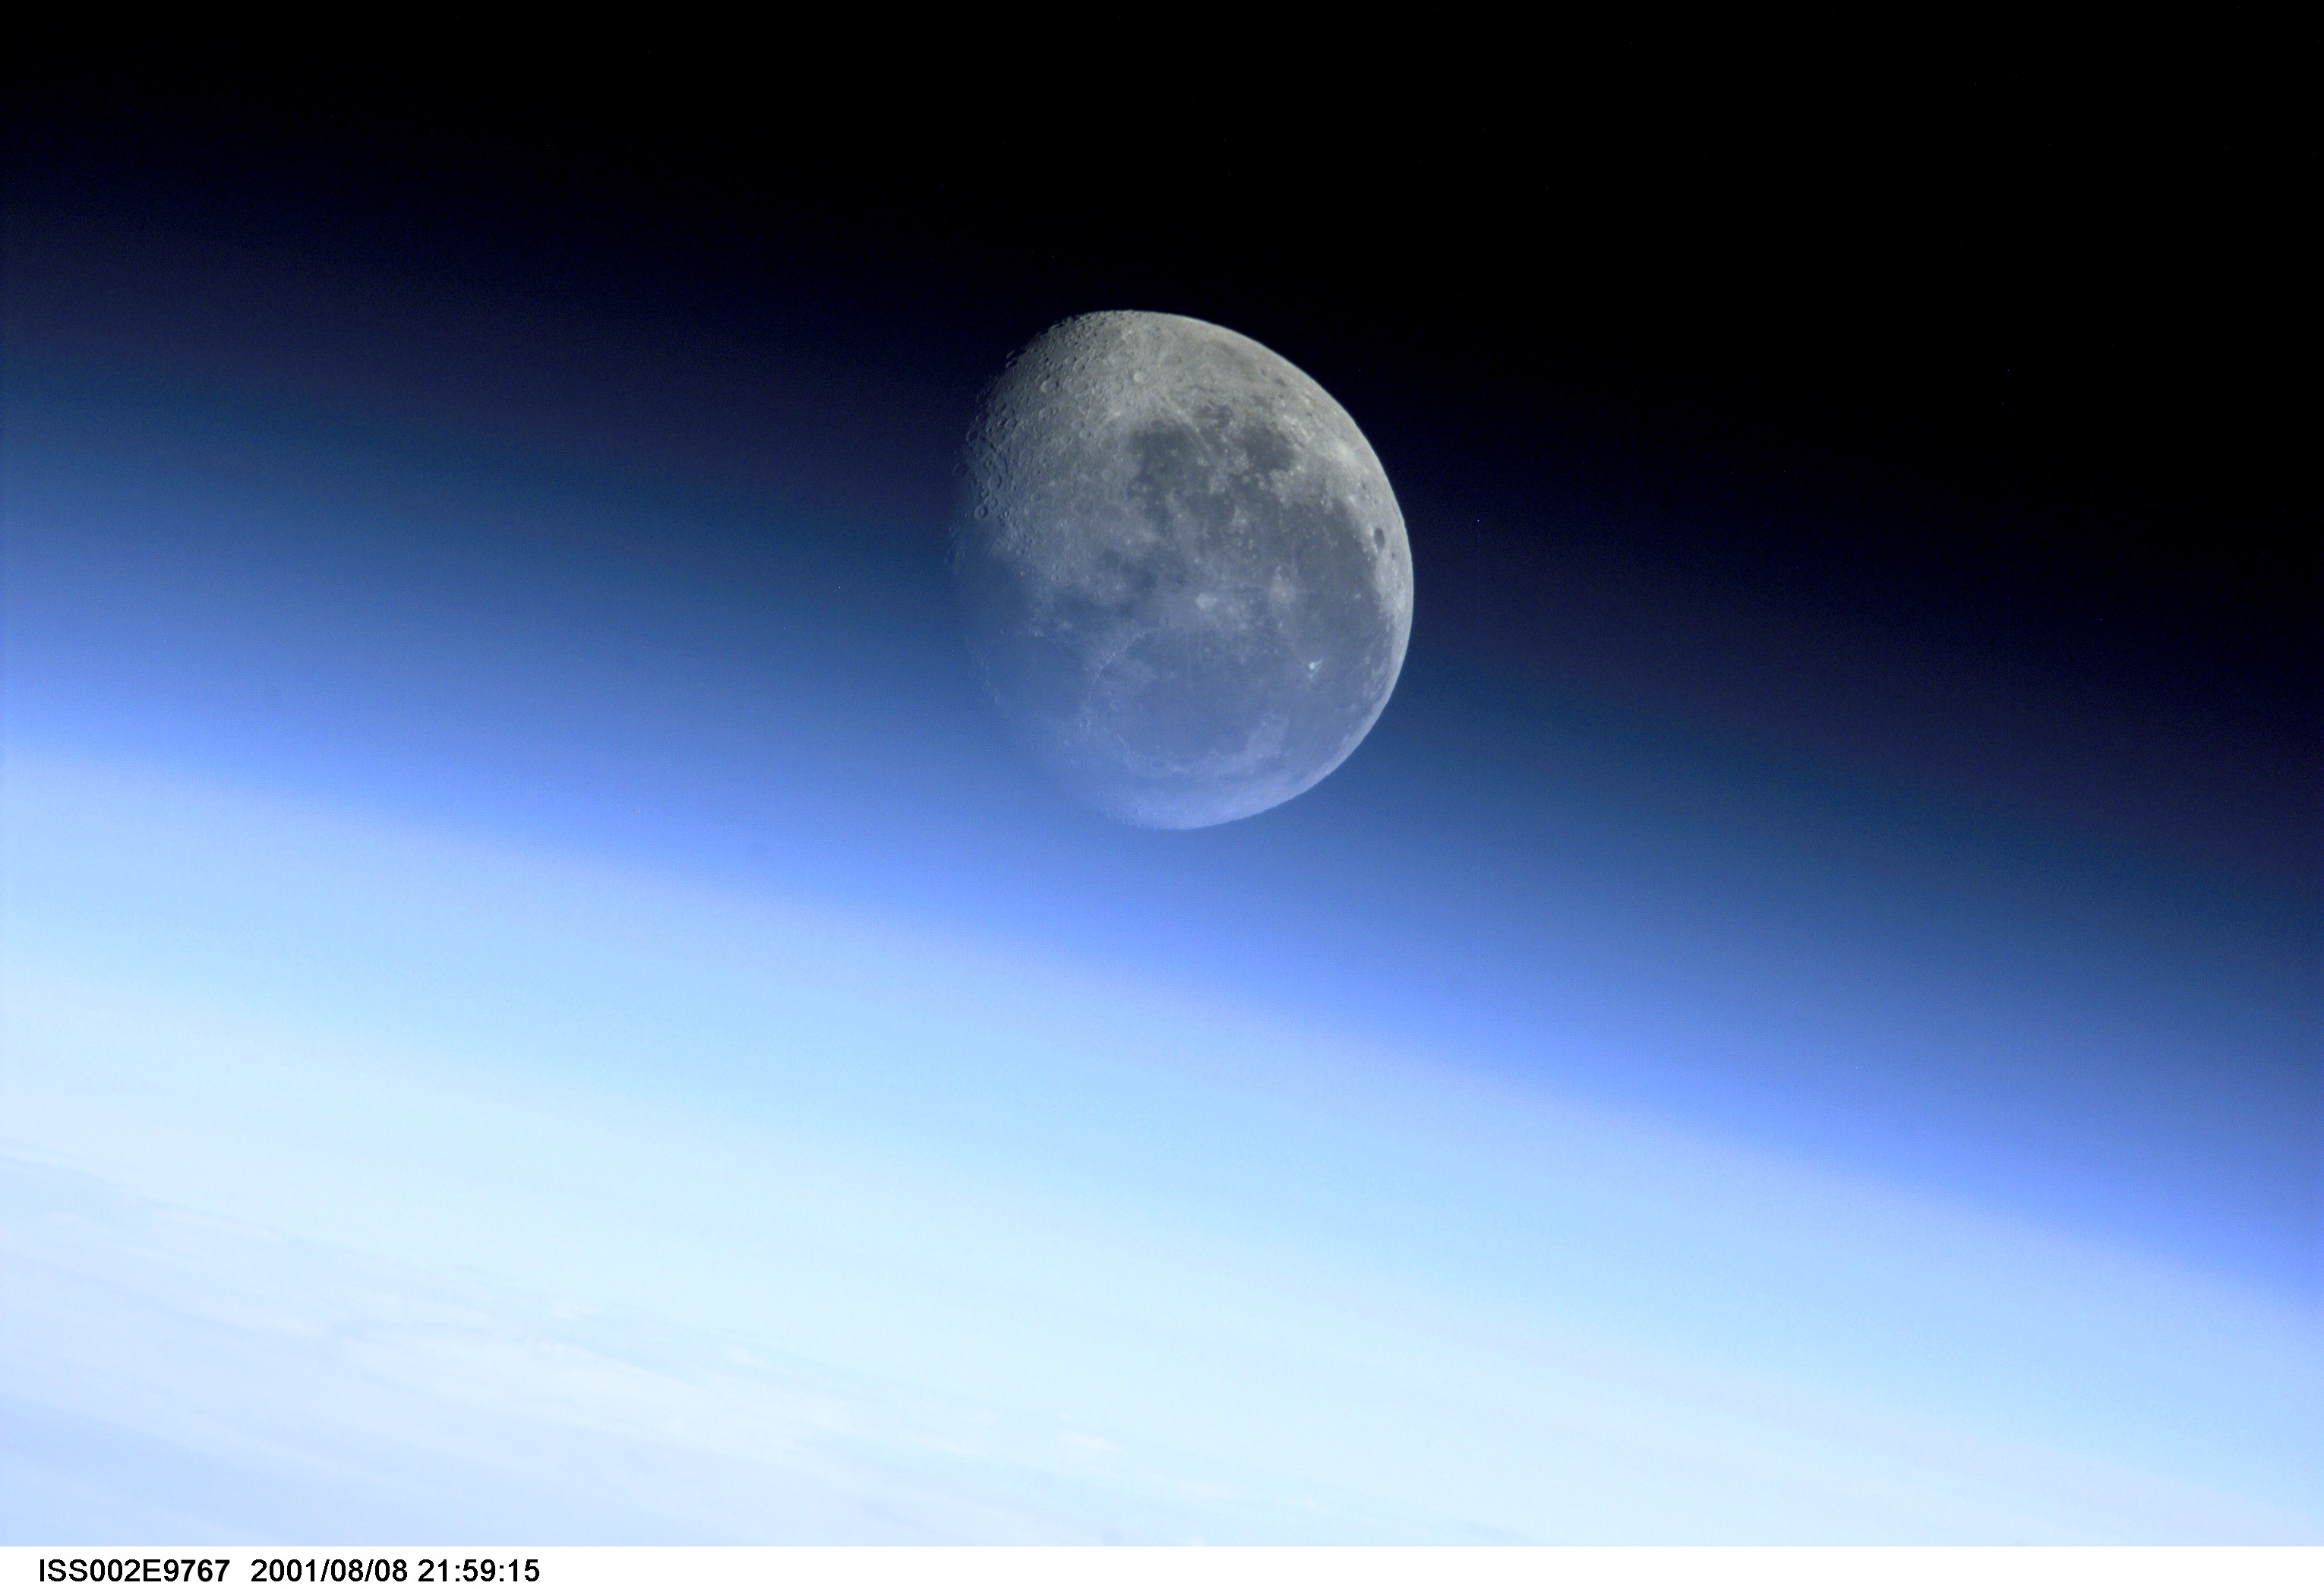 The Moon, taken from ISS